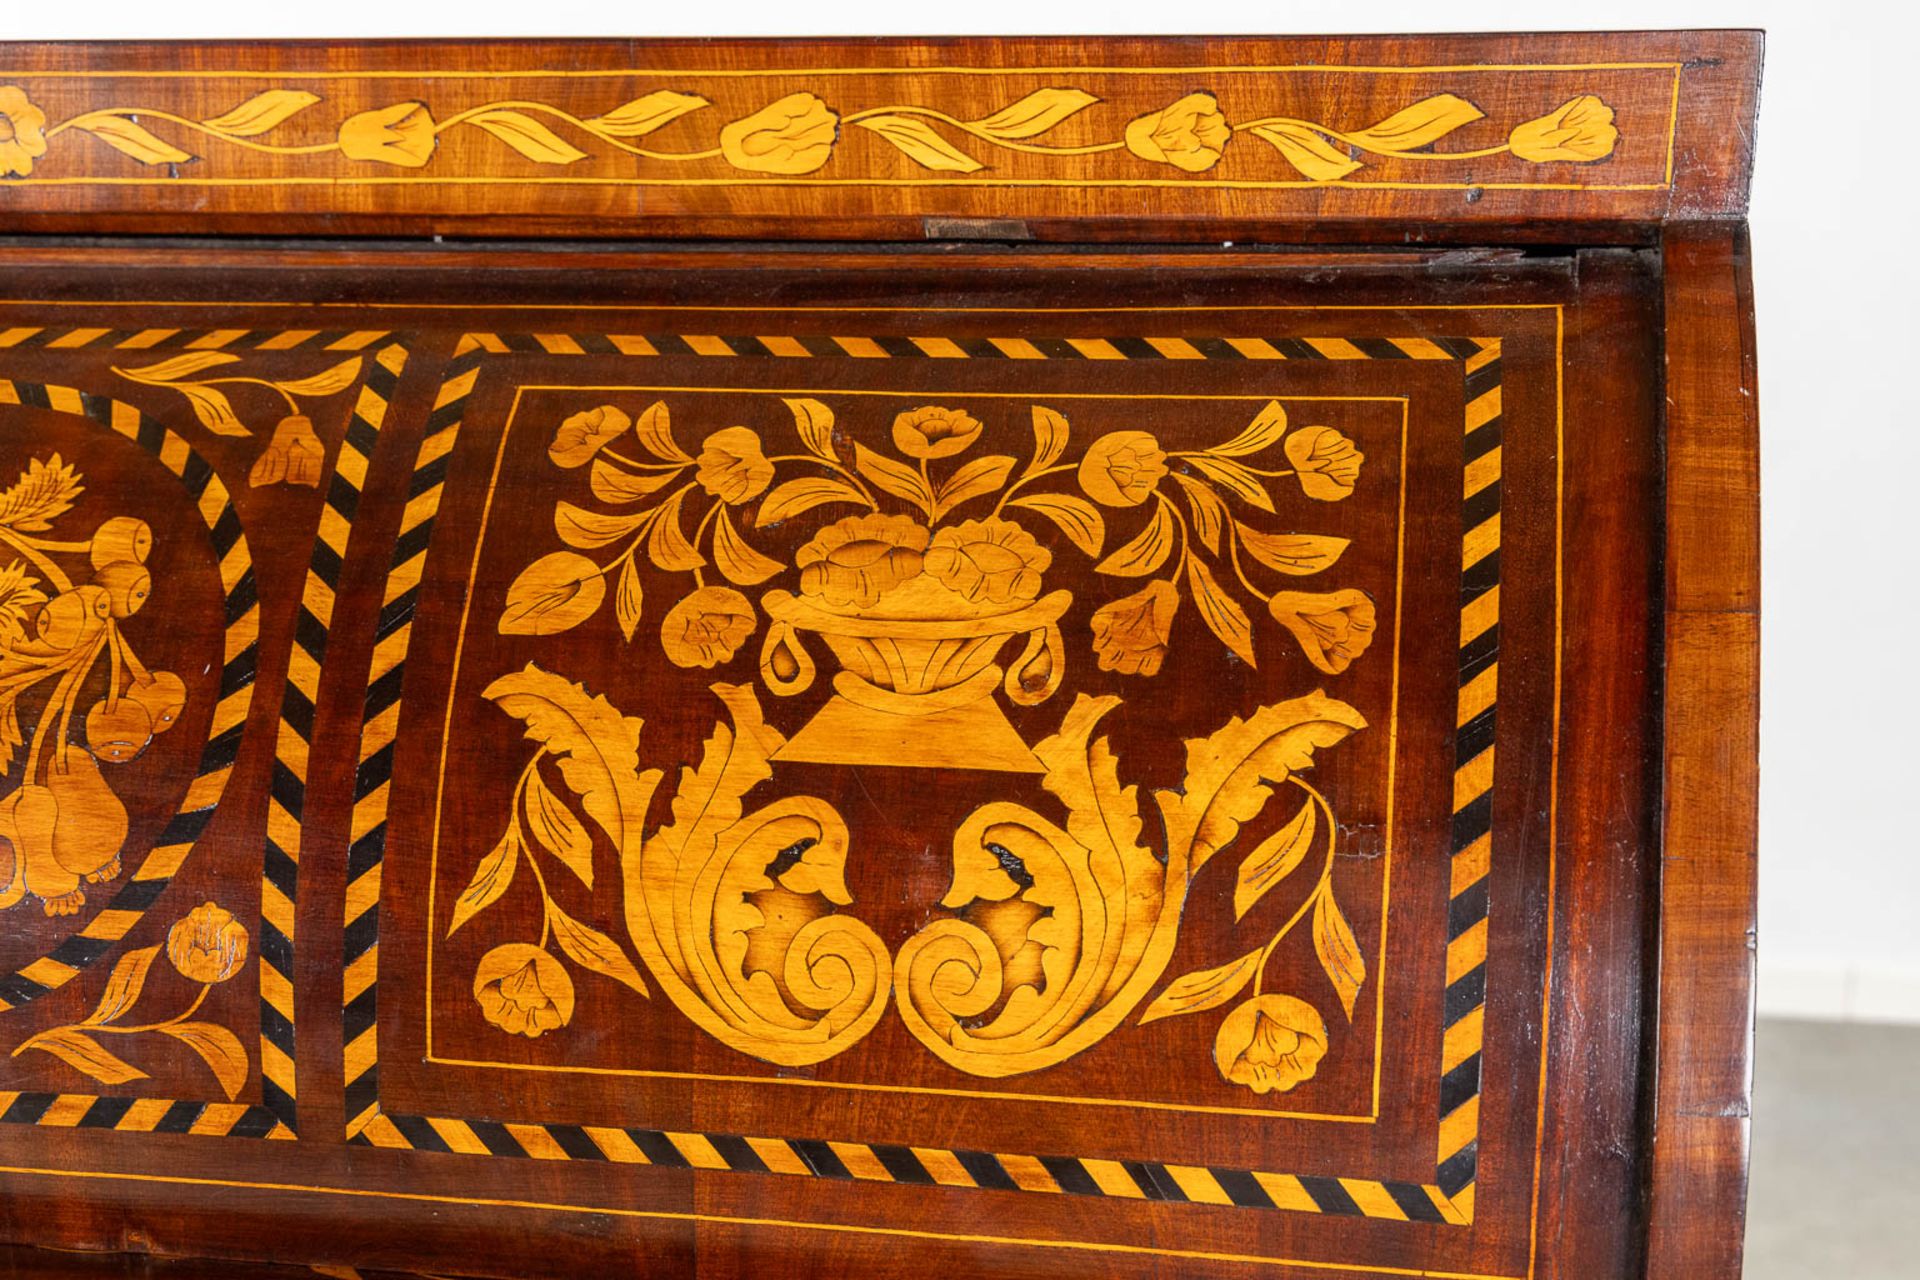 A fine marquetry inlay secretaire cabinet, The Netherlands, 18th C. (L:51 x W:112 x H:108 cm) - Image 12 of 20